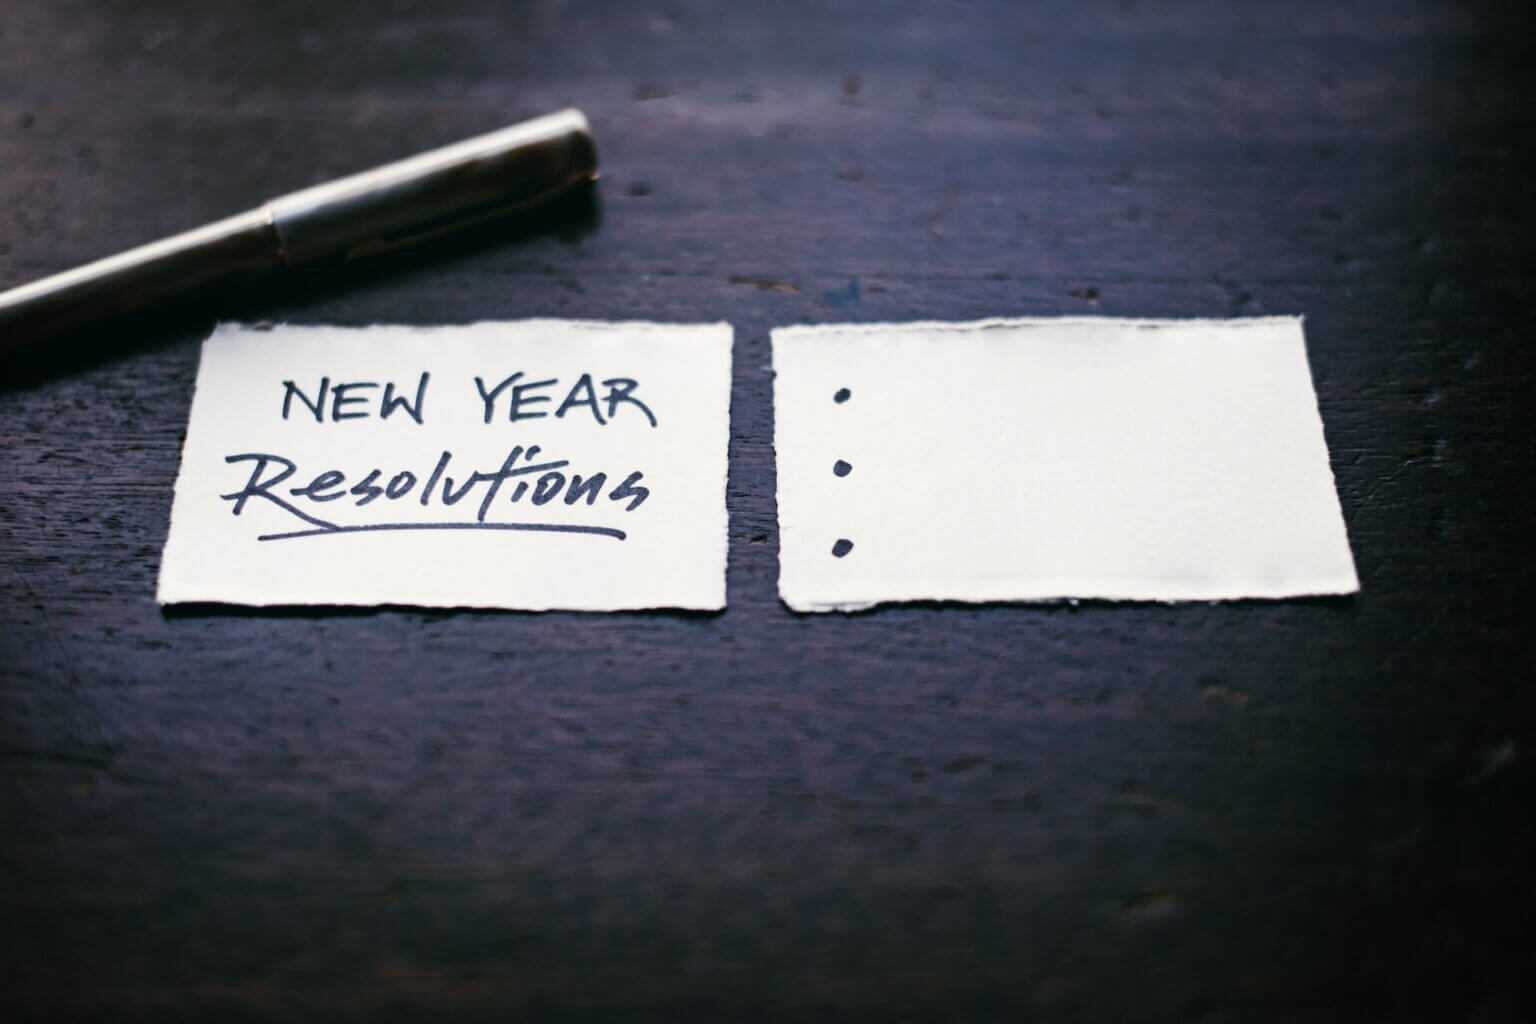 4 TIPS FOR KEEPING YOUR FITNESS NEW YEAR'S RESOLUTION - Can